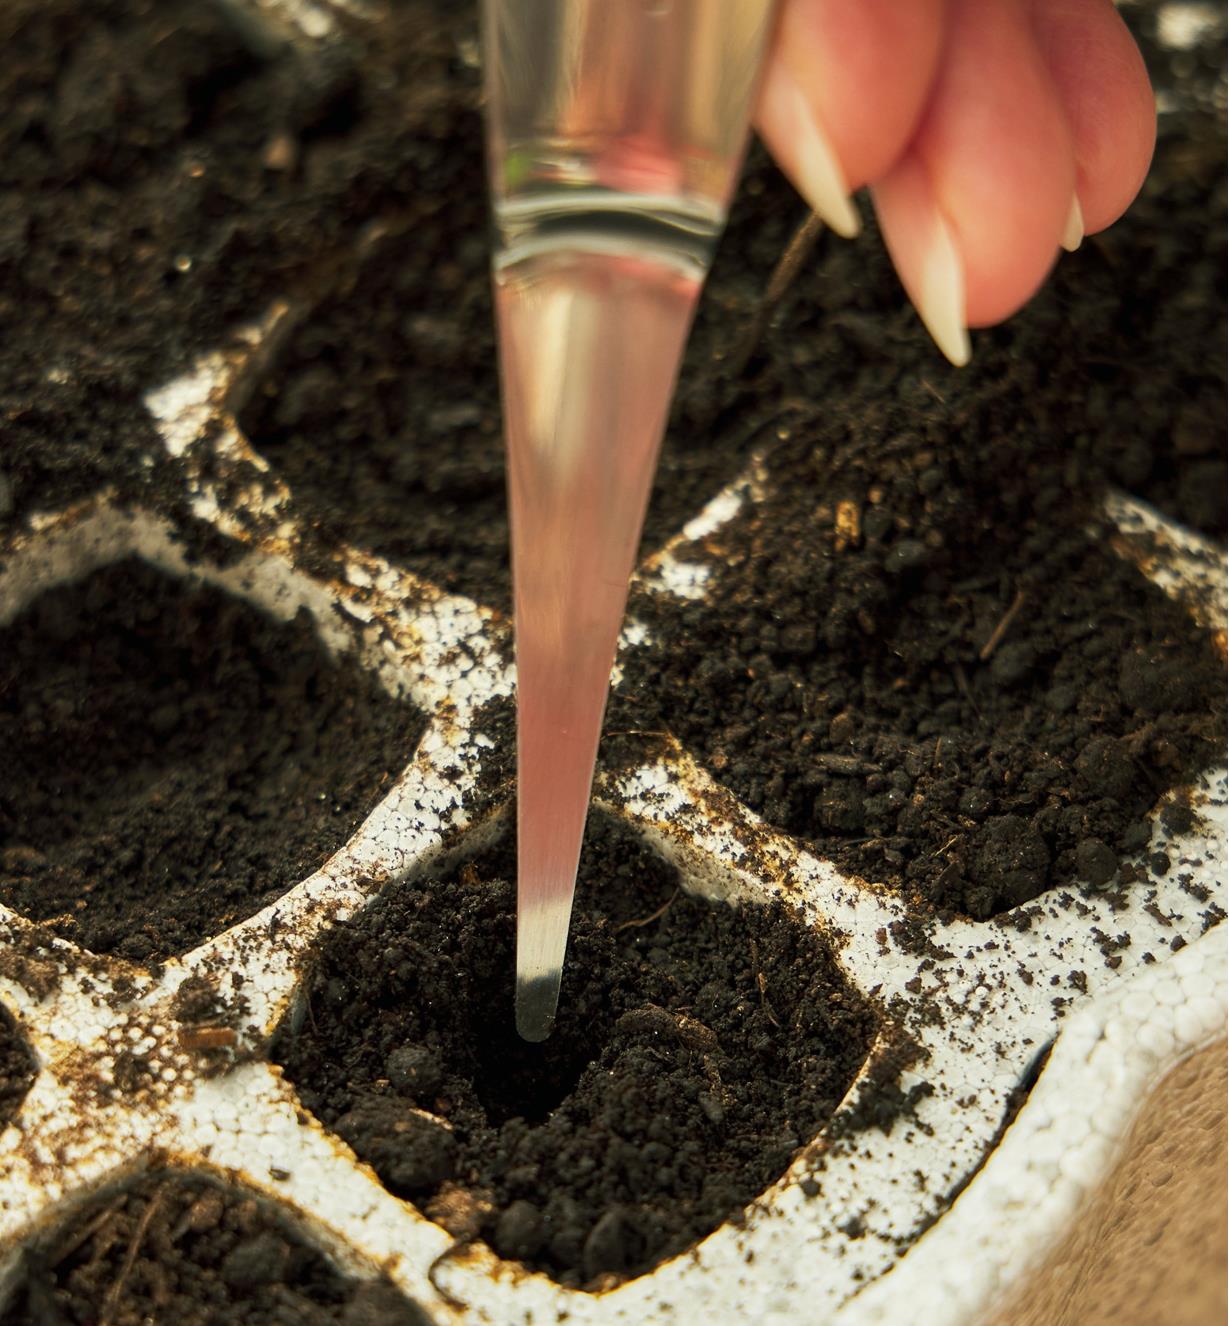 Using a potting tool to create a small hole for a seed in the soil of a seed-starter cell